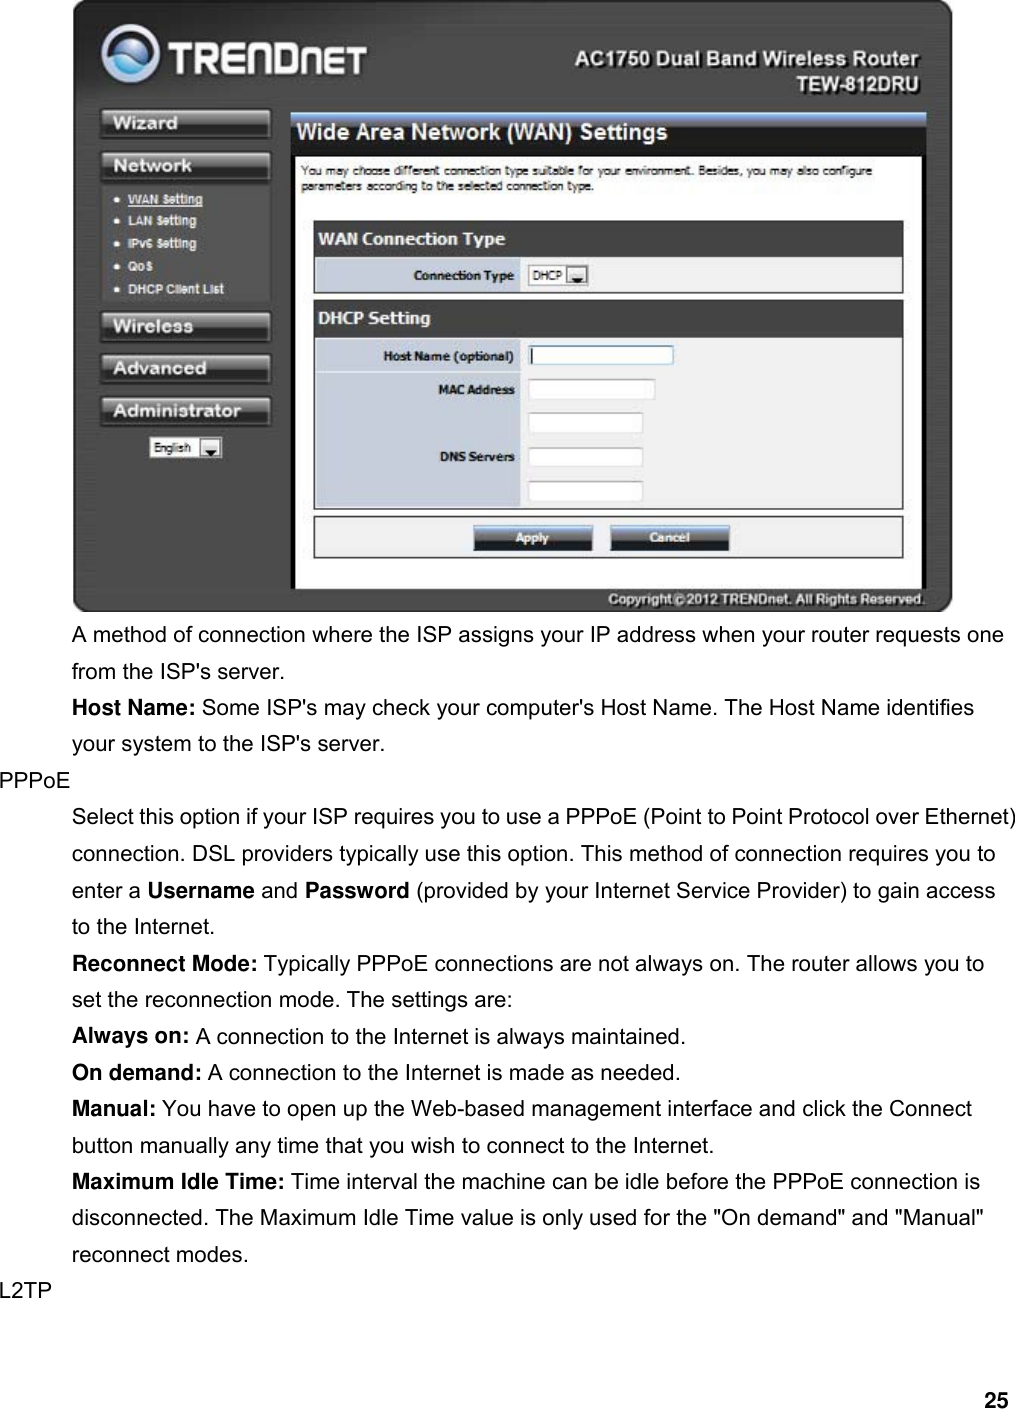 25  A method of connection where the ISP assigns your IP address when your router requests one from the ISP&apos;s server.   Host Name: Some ISP&apos;s may check your computer&apos;s Host Name. The Host Name identifies your system to the ISP&apos;s server.   PPPoE  Select this option if your ISP requires you to use a PPPoE (Point to Point Protocol over Ethernet) connection. DSL providers typically use this option. This method of connection requires you to enter a Username and Password (provided by your Internet Service Provider) to gain access to the Internet.   Reconnect Mode: Typically PPPoE connections are not always on. The router allows you to set the reconnection mode. The settings are:   Always on: A connection to the Internet is always maintained.   On demand: A connection to the Internet is made as needed.   Manual: You have to open up the Web-based management interface and click the Connect button manually any time that you wish to connect to the Internet.   Maximum Idle Time: Time interval the machine can be idle before the PPPoE connection is disconnected. The Maximum Idle Time value is only used for the &quot;On demand&quot; and &quot;Manual&quot; reconnect modes.   L2TP  